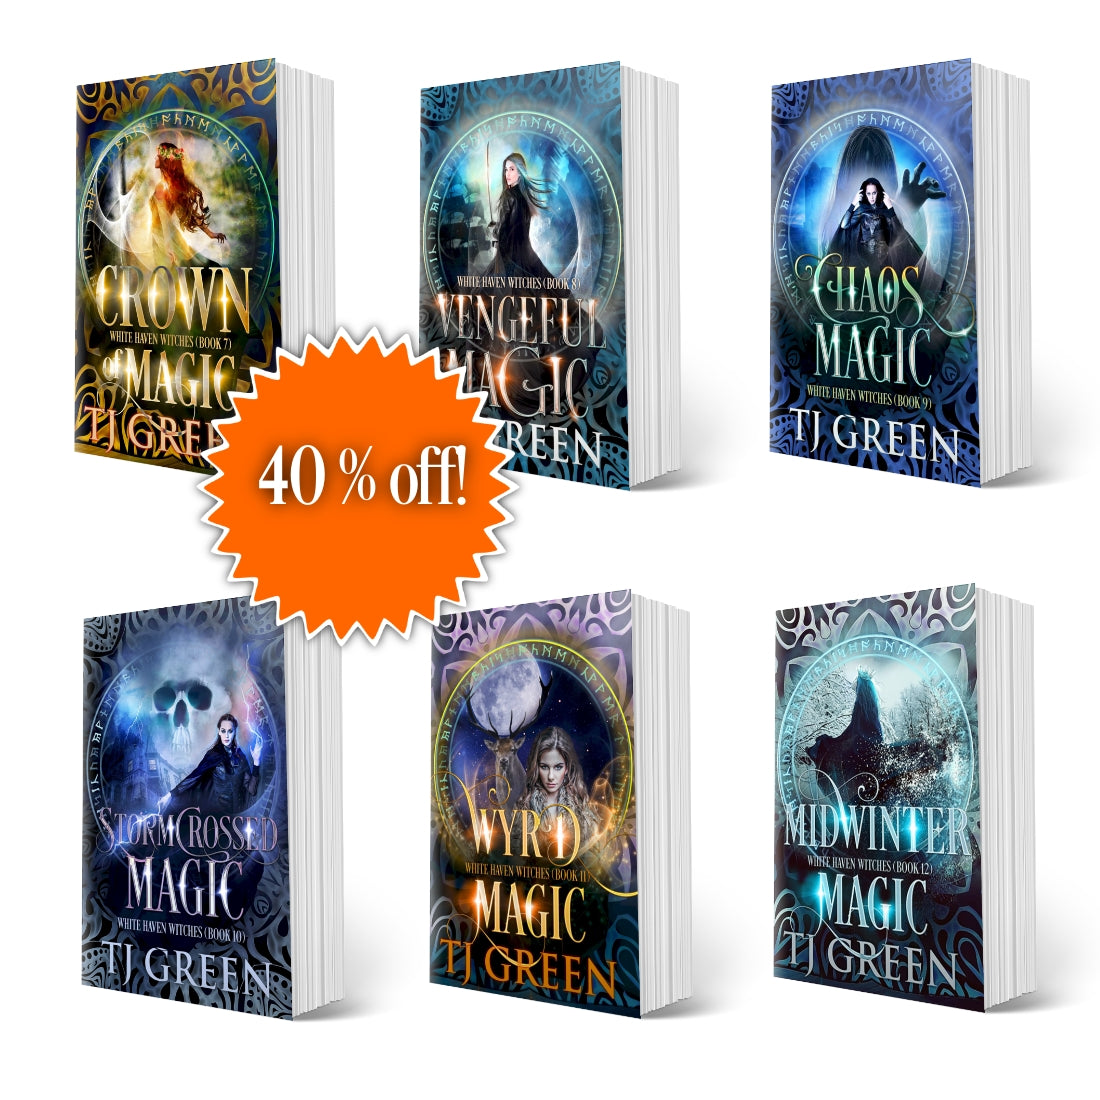 White Haven Witches Book 7 - 12 paperback bundles.